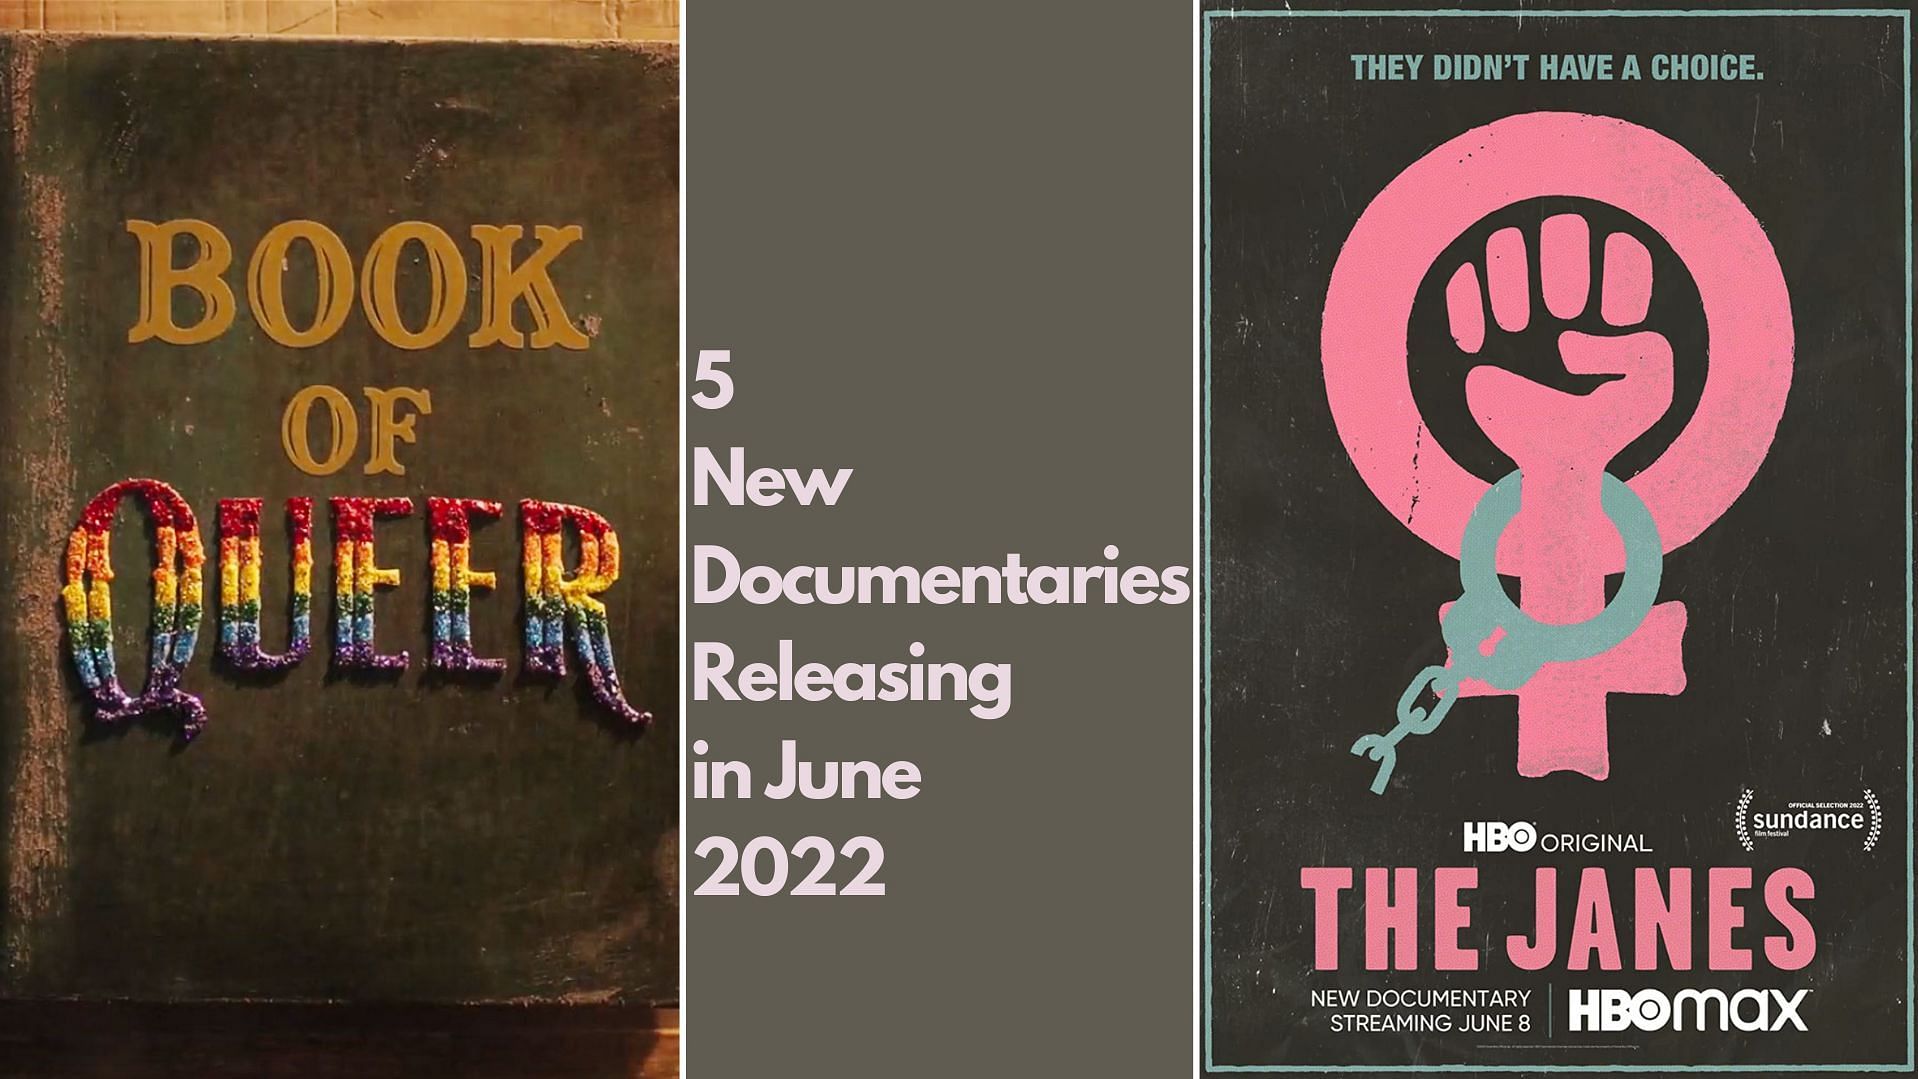 5 New Documentaries set for release this month. (Images via Discovery+/HBO)